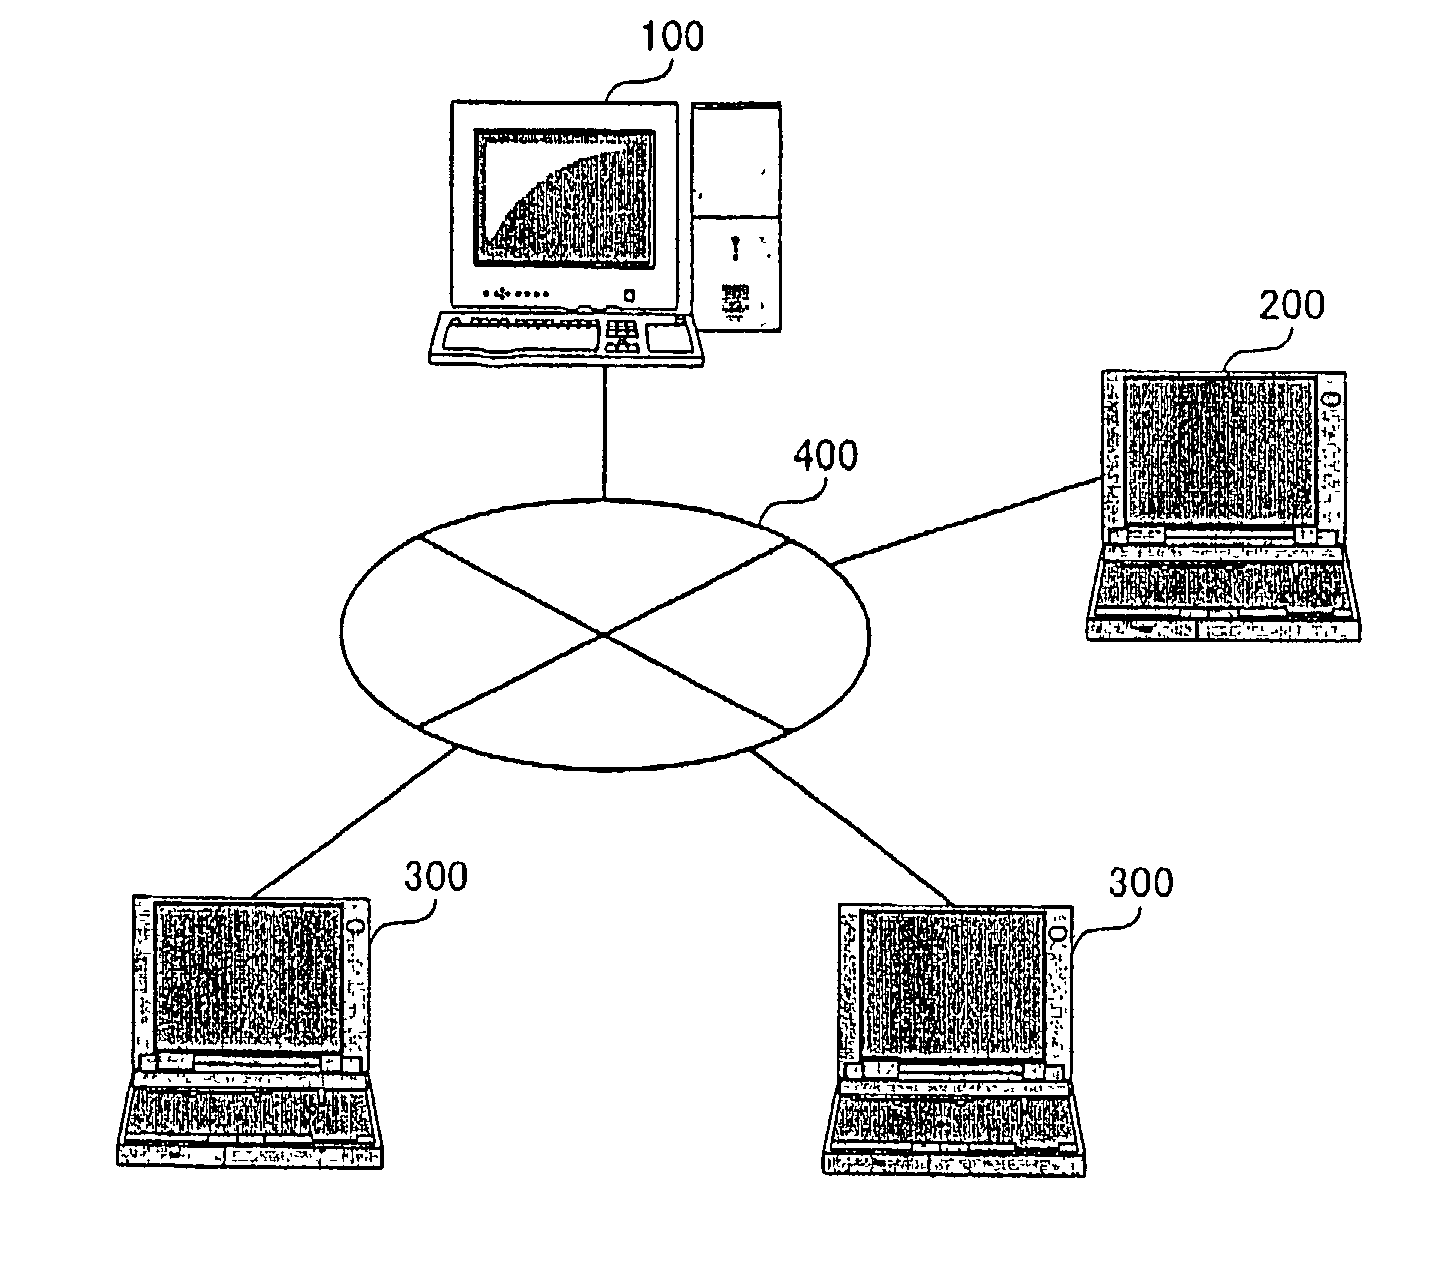 System, method and apparatus for updating electronic mail recipient lists